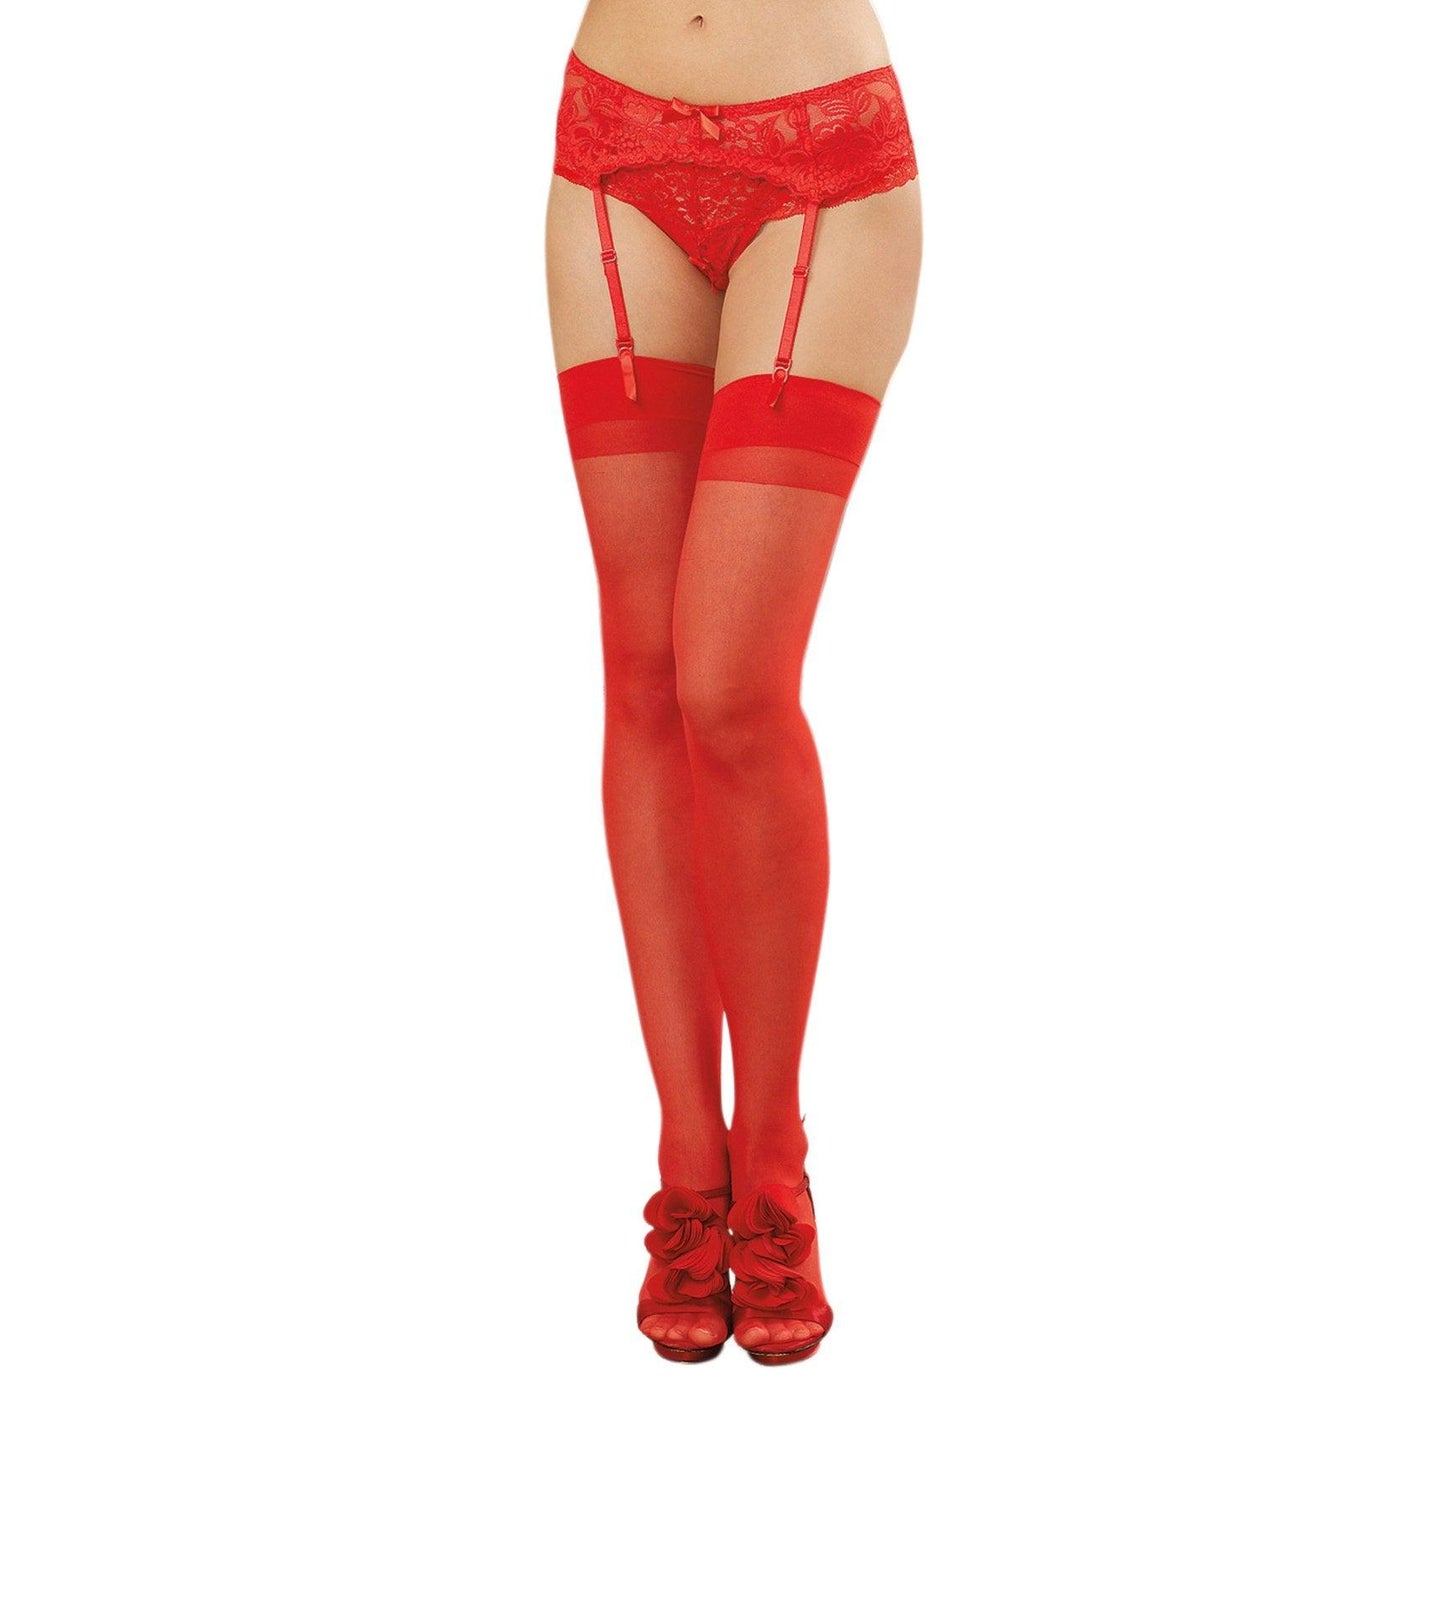 Sheer Thigh High - One Size - Red - My Sex Toy Hub